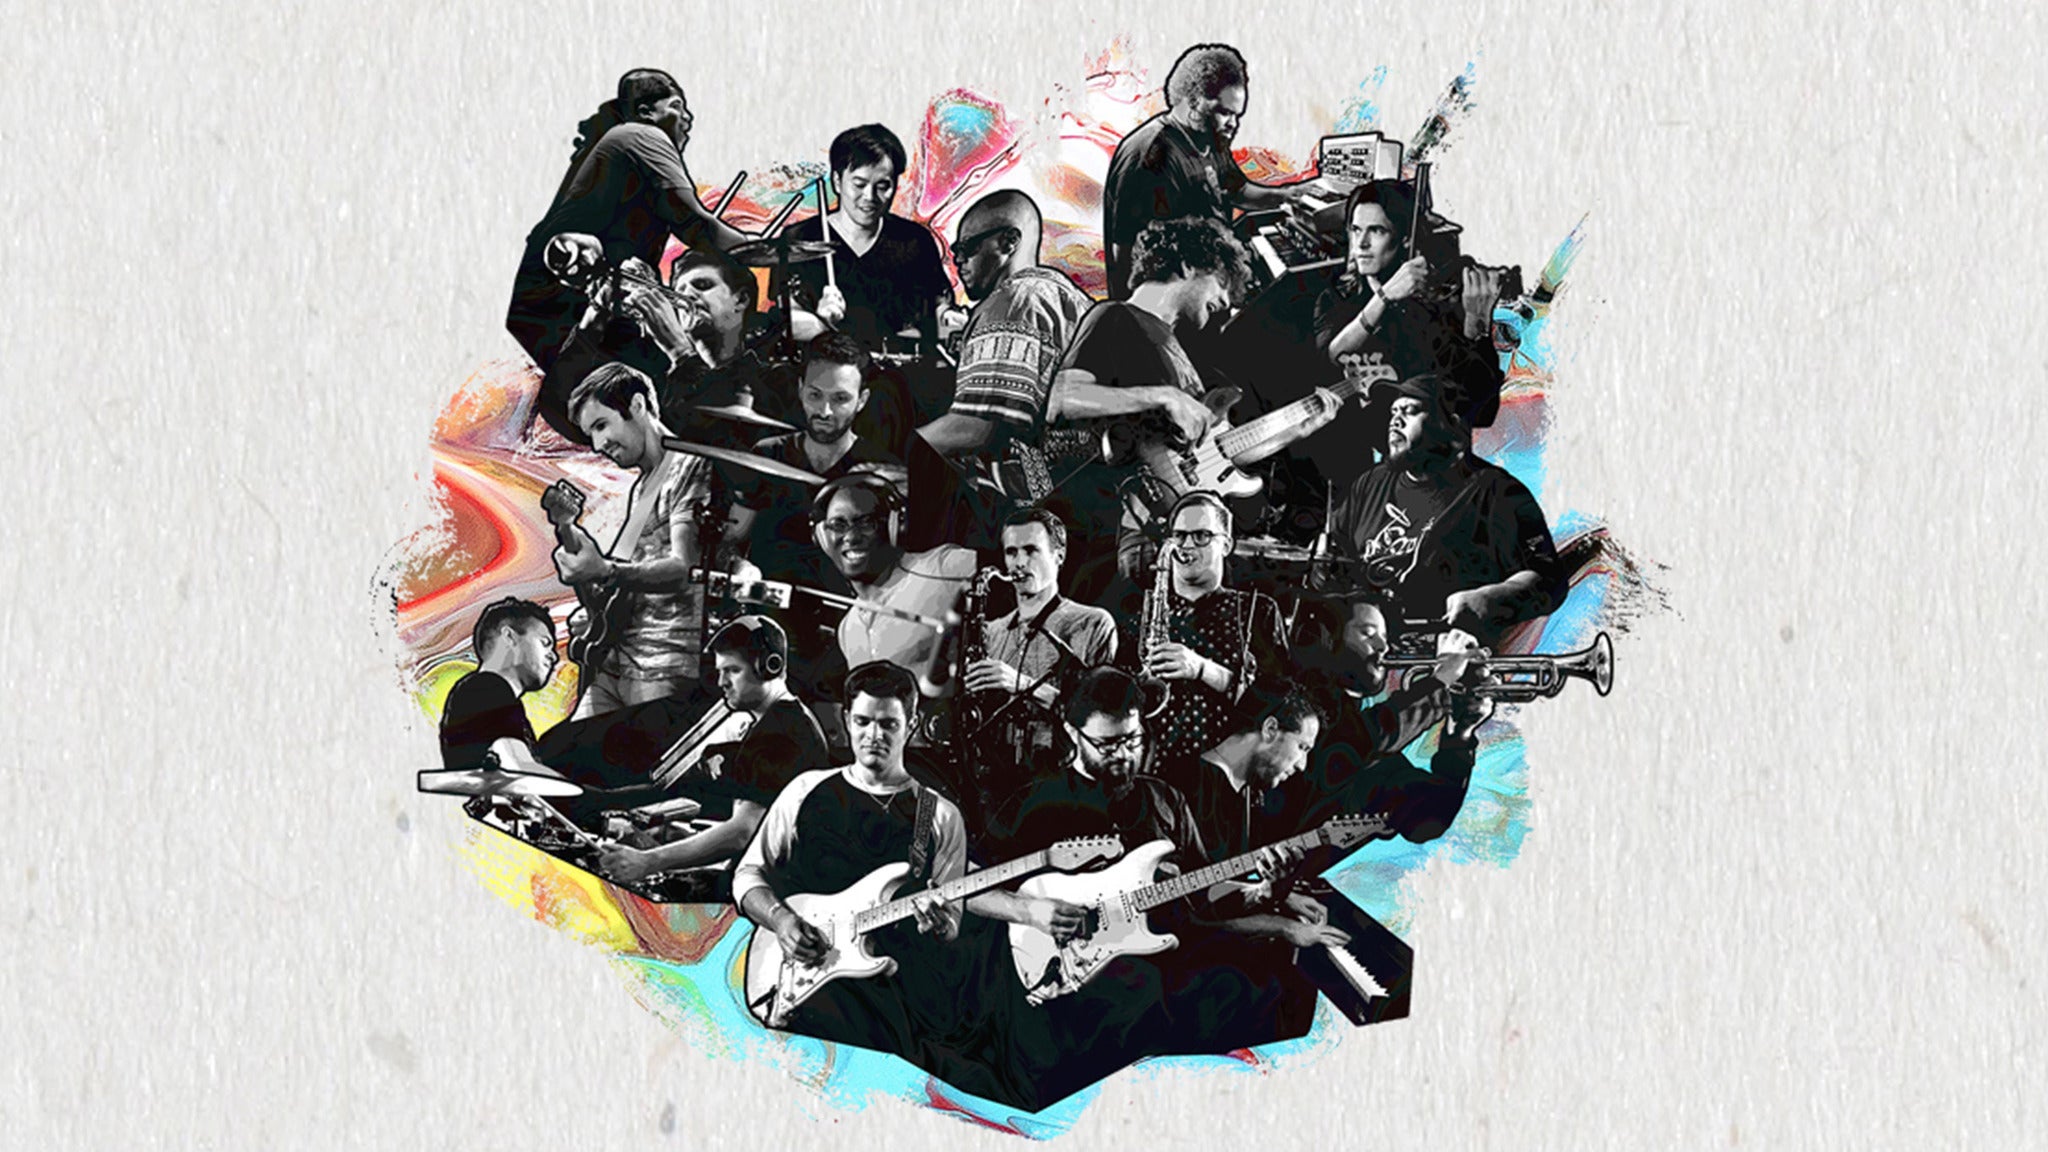 Main image for event titled Snarky Puppy